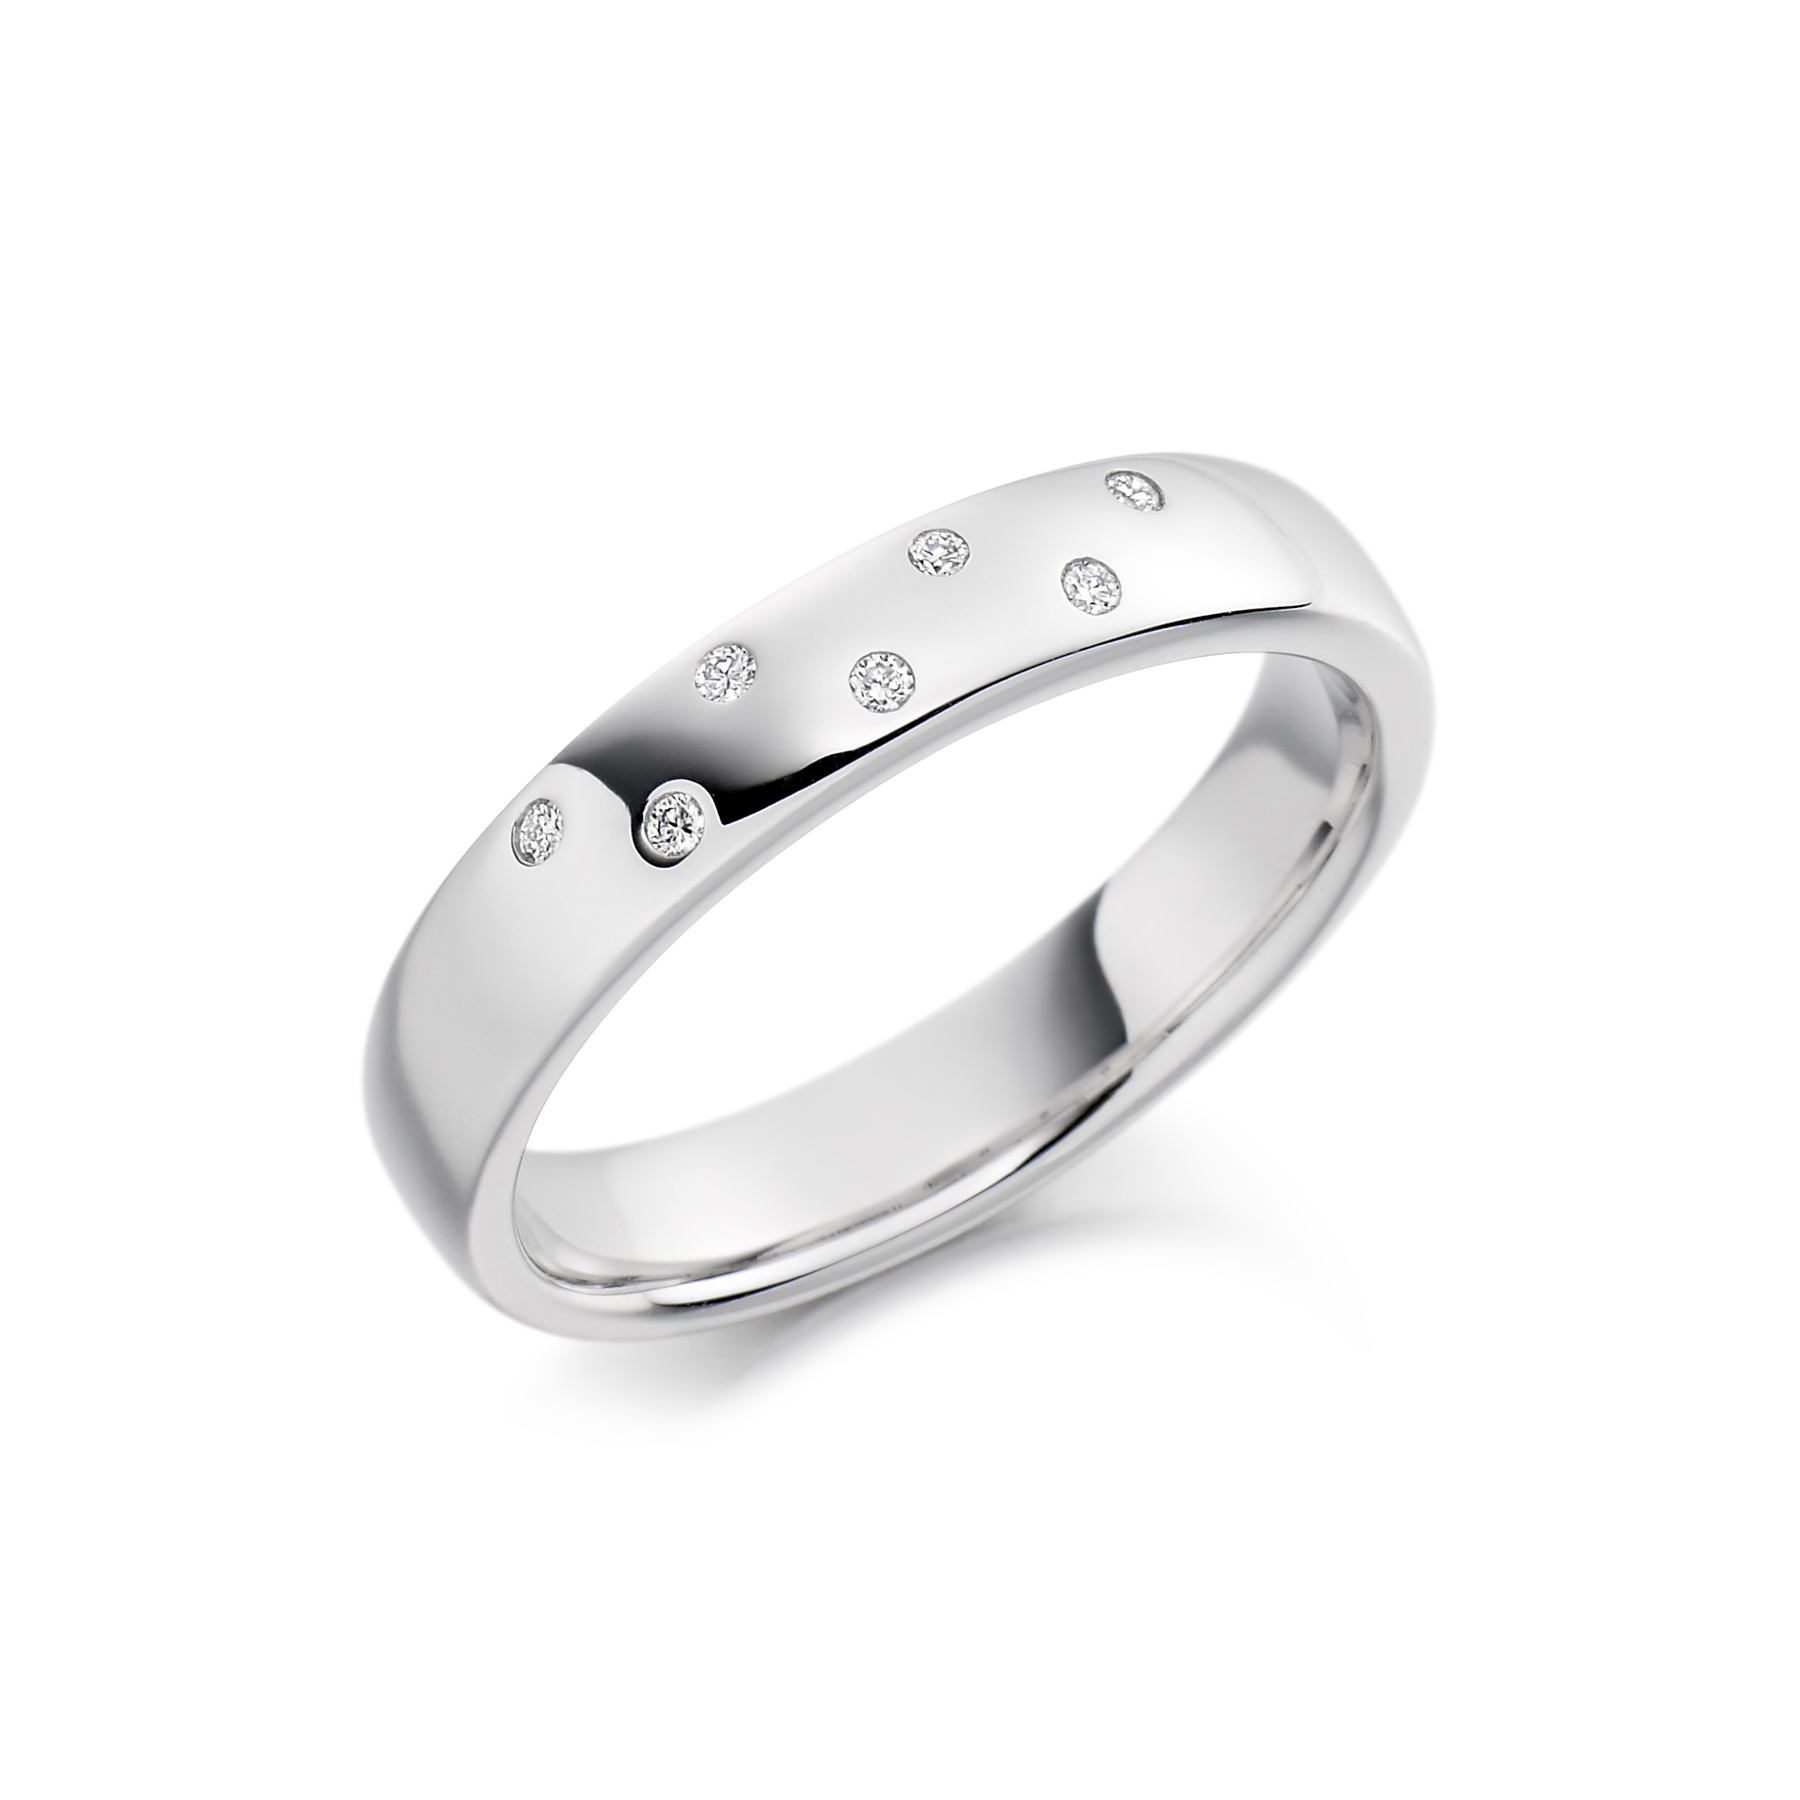 Wedding Band Set with Scattered Diamond